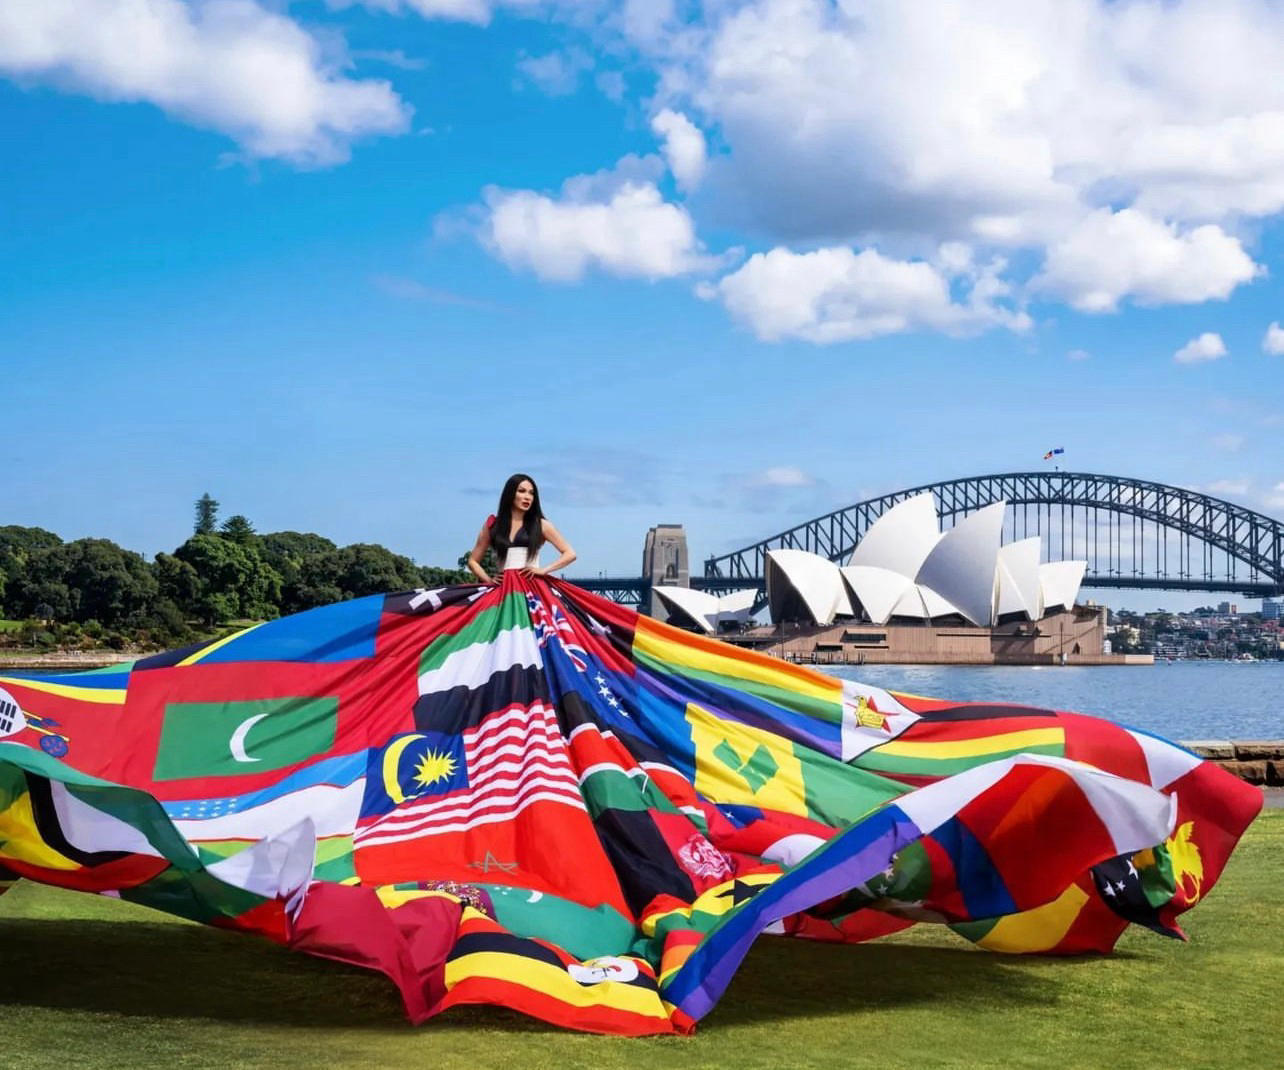 image  1 We are excited to welcome the world to Australia to celebrate #SydneyWorldPride